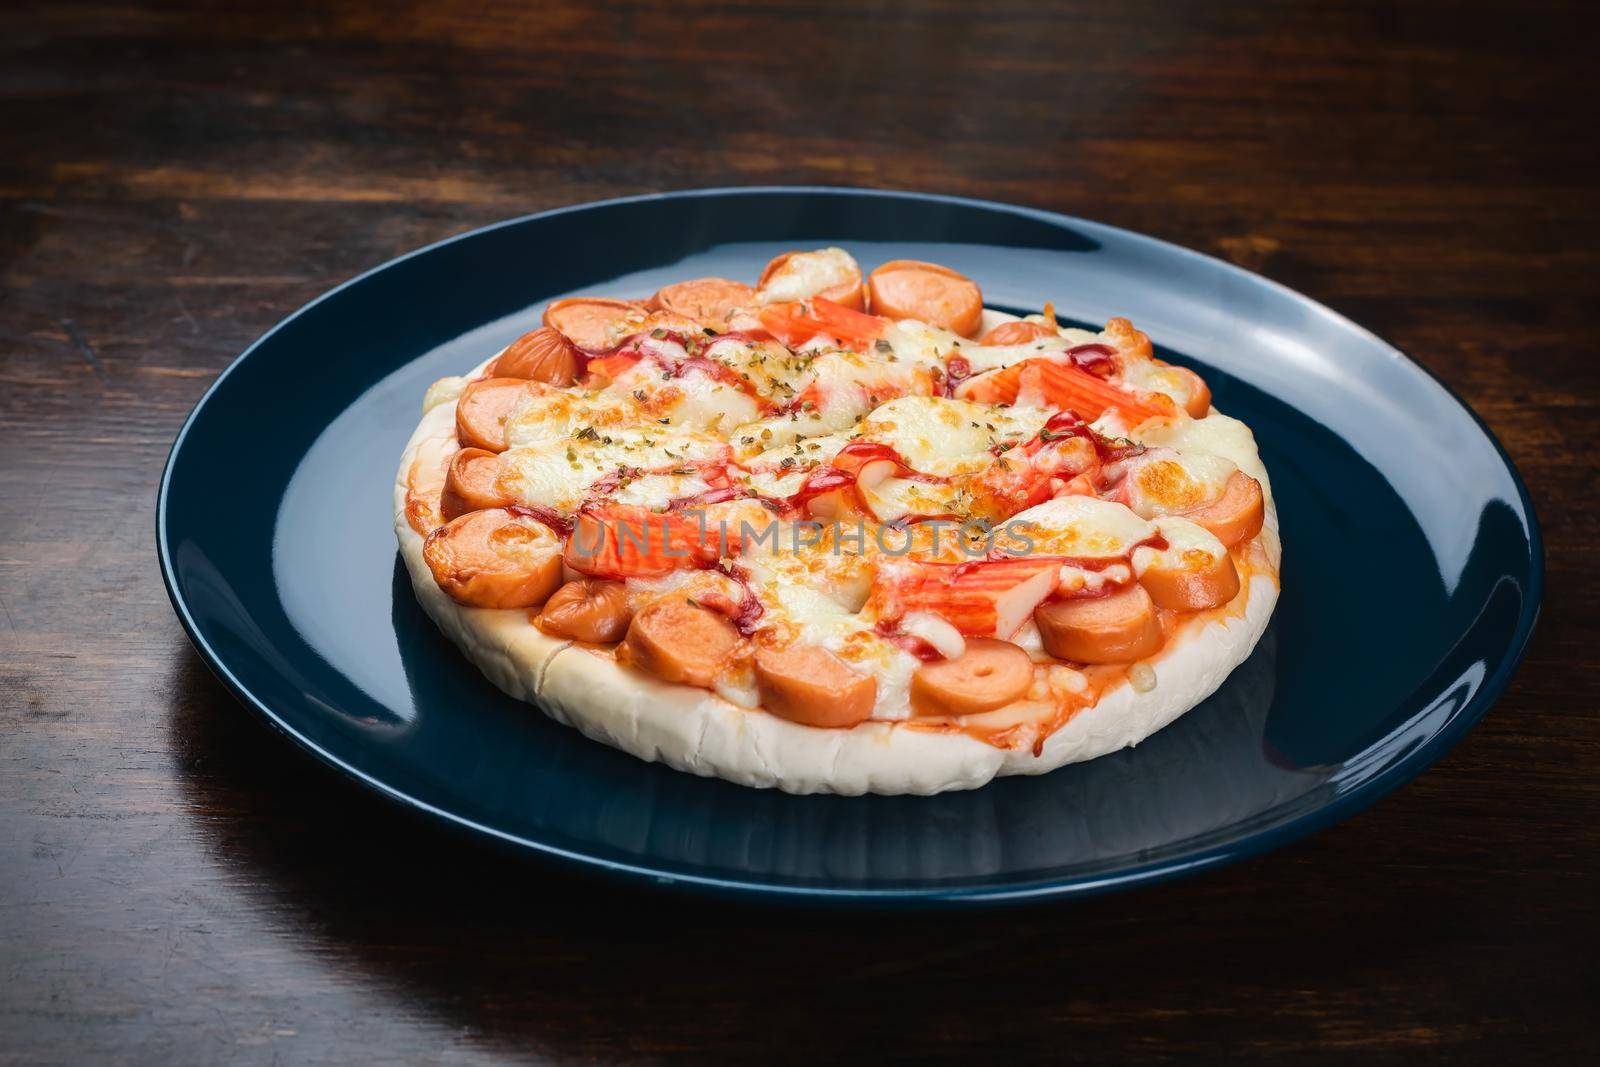 Pizza, sausage and crab sticks in a ceramic plate. by wattanaphob